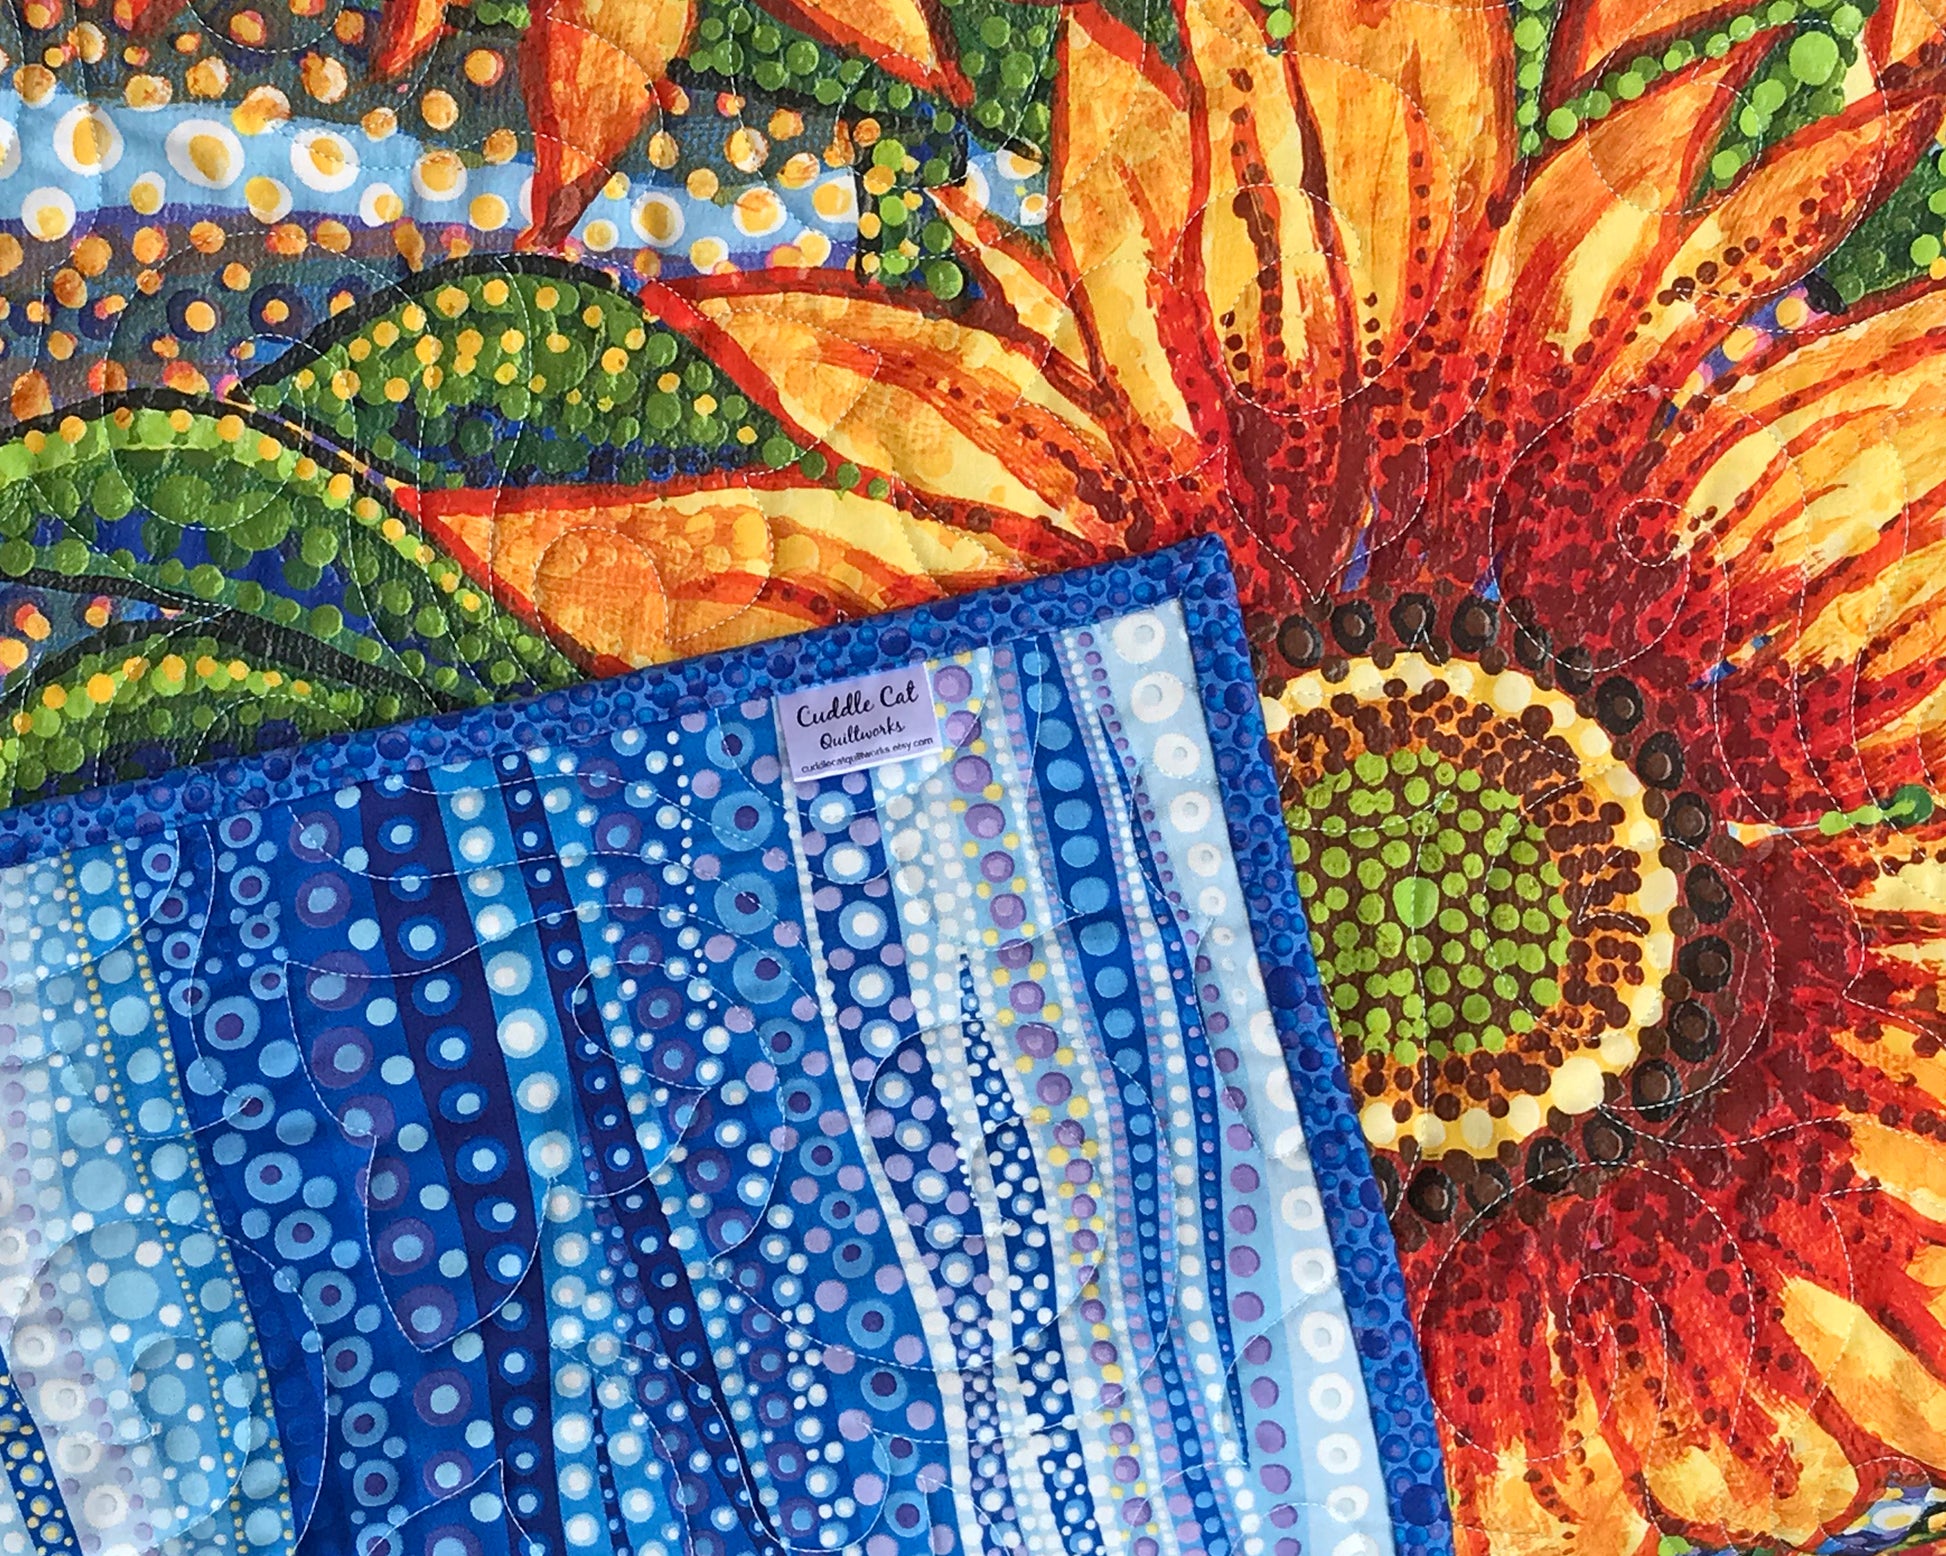 Blue and Gold Sunflower Themed Panel Quilt - Handmade Quilts, Digital Patterns, and Home Décor items online - Cuddle Cat Quiltworks